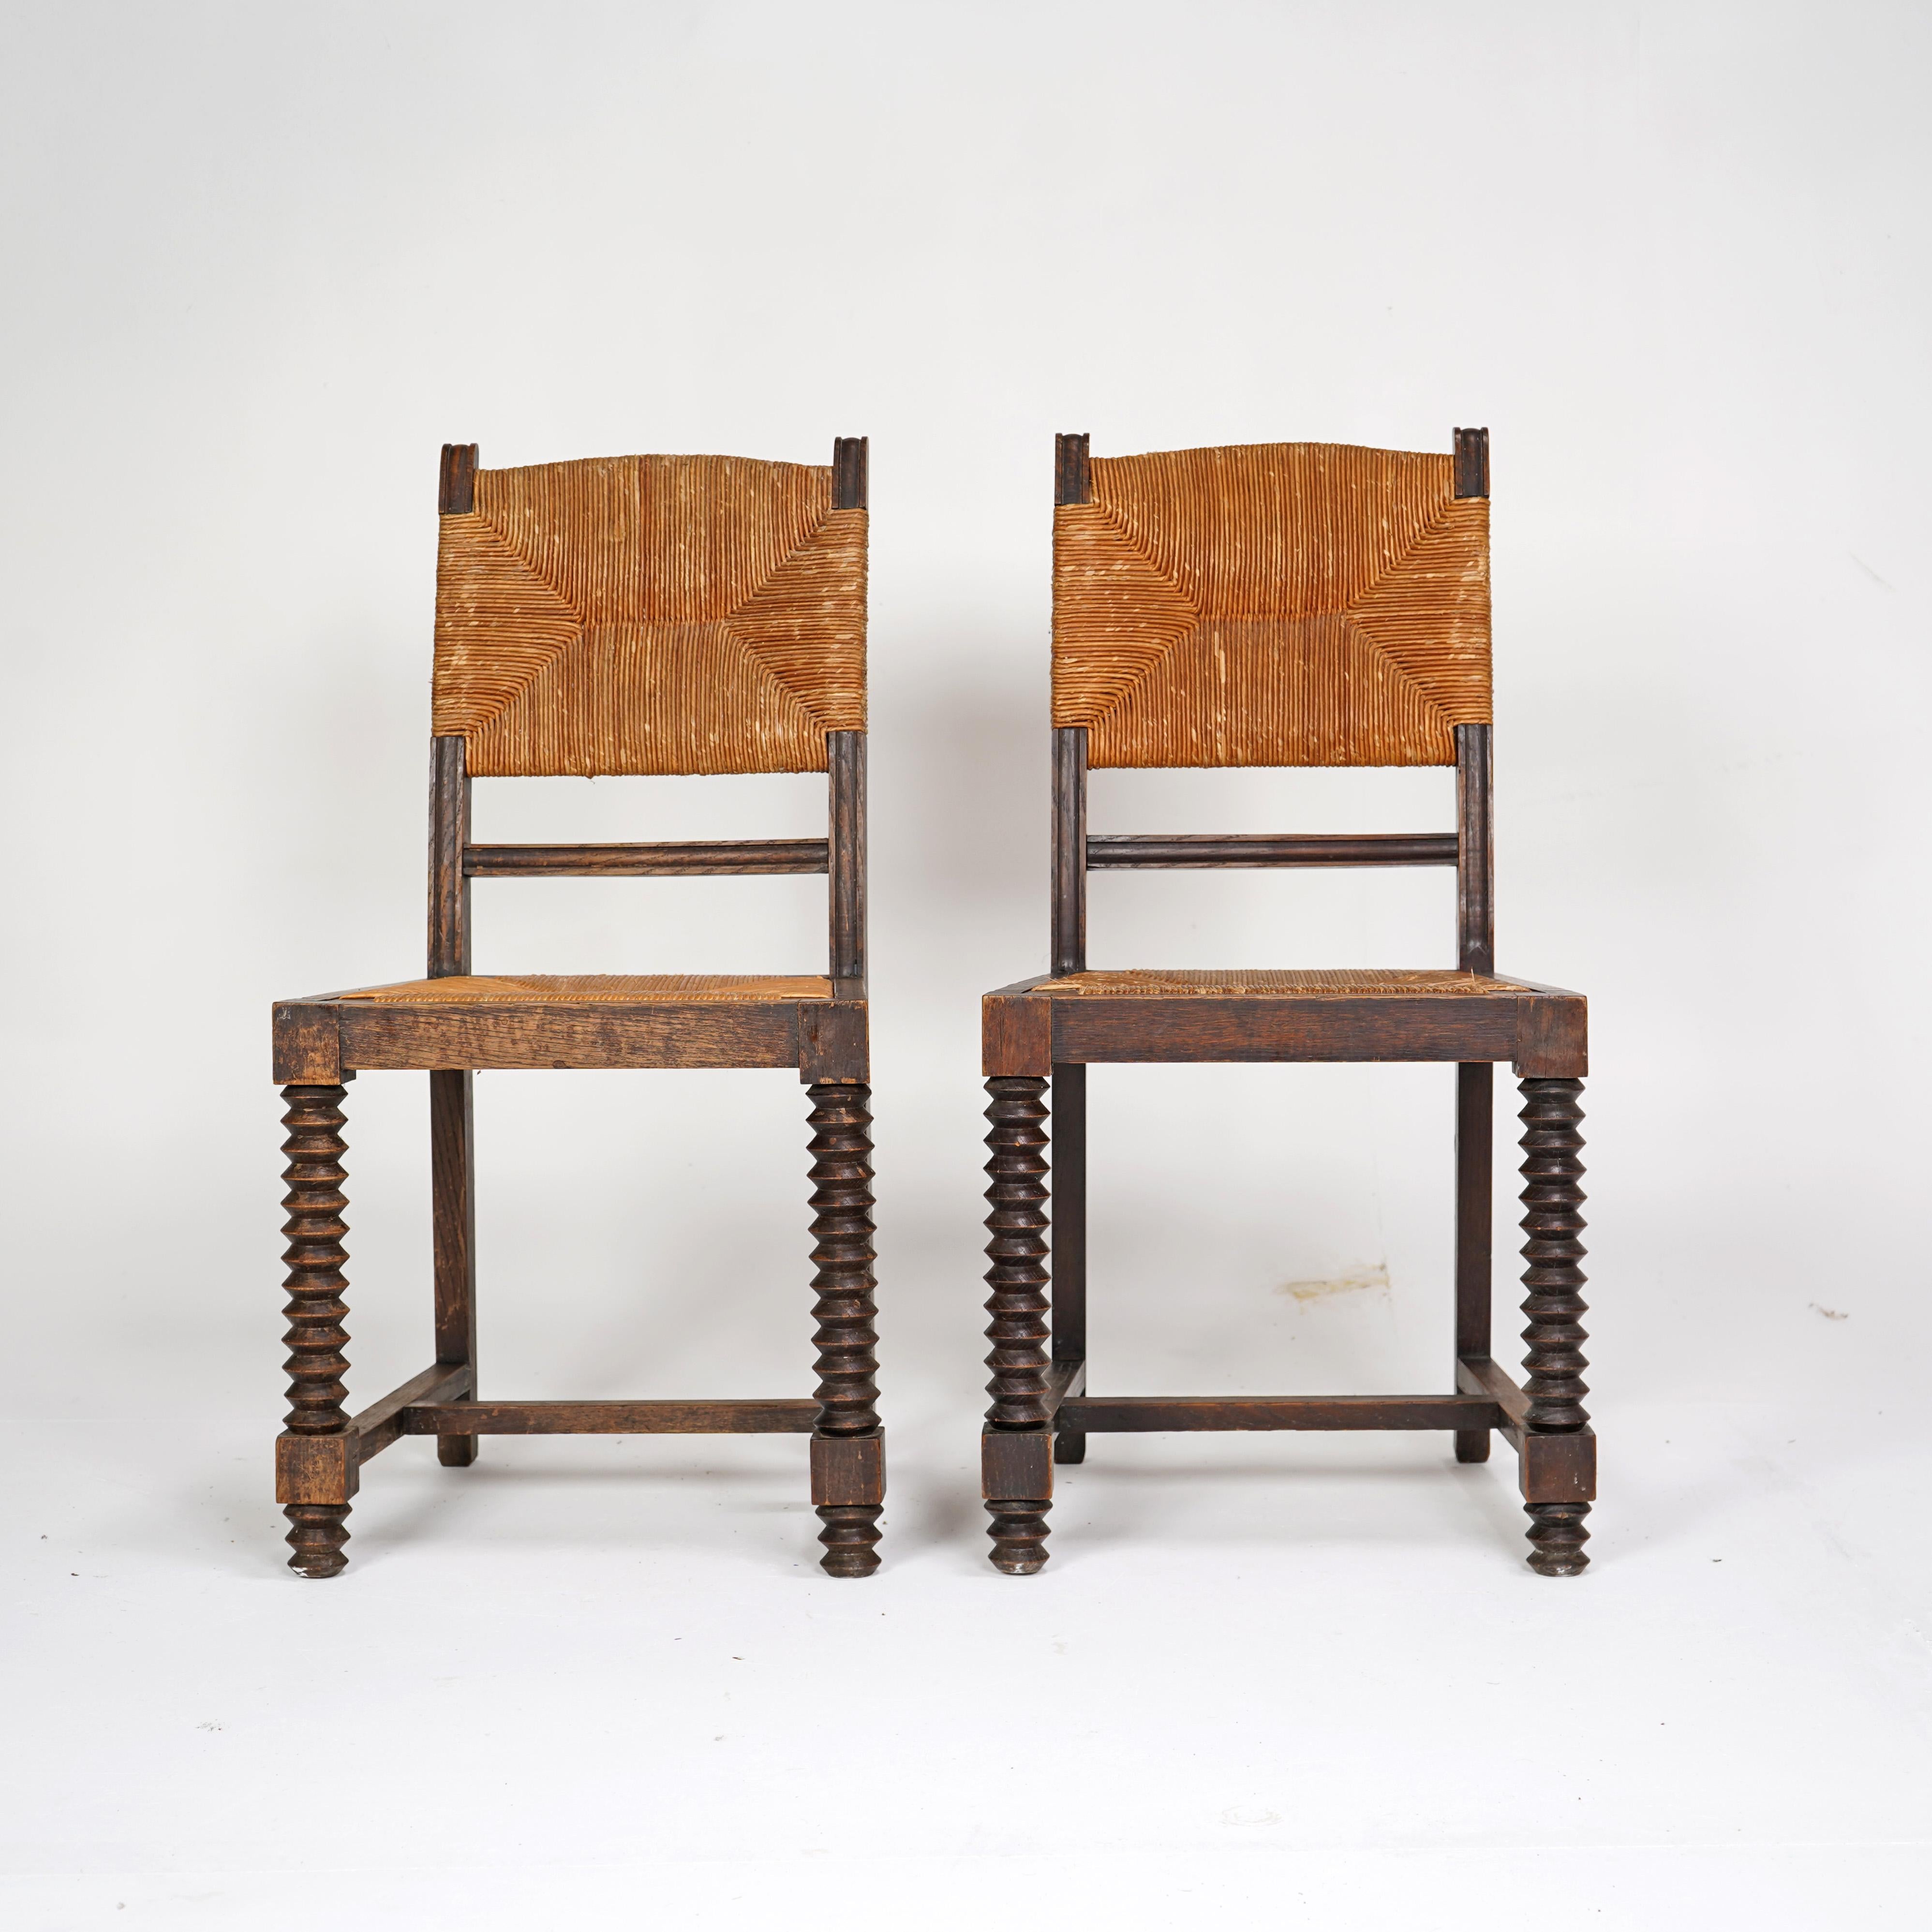 Pair Of French Charles Dudouyt Style Chairs - Wooden with Rush Seat In Good Condition For Sale In Dorchester, GB